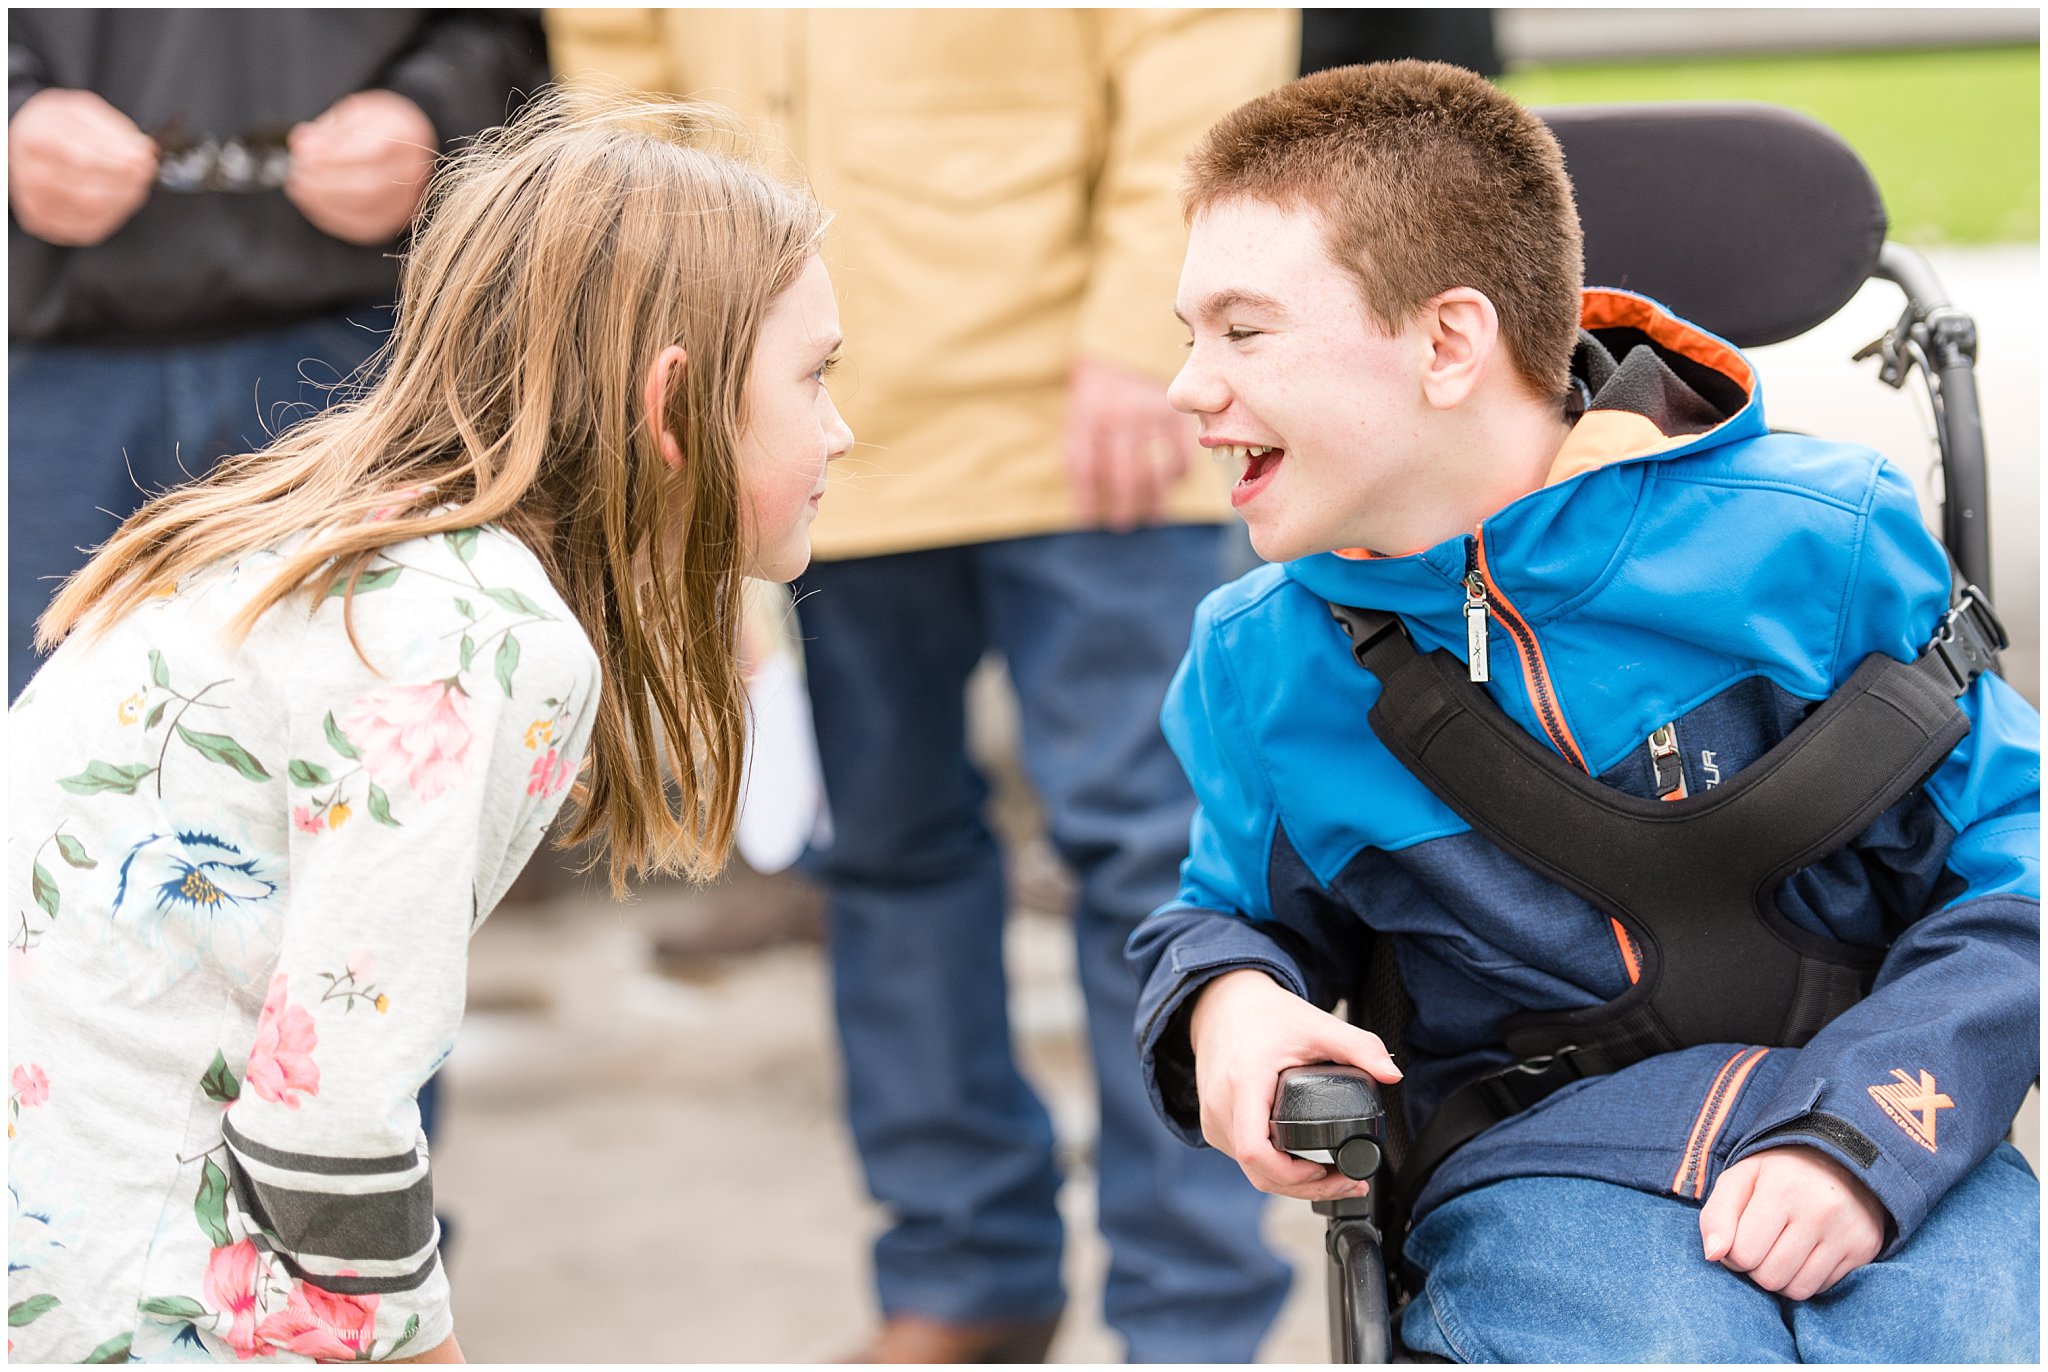 Boy in wheel chair laughing and friend | Tremonton Family Pictures and Make a Wish Event | Jessie and Dallin Photography